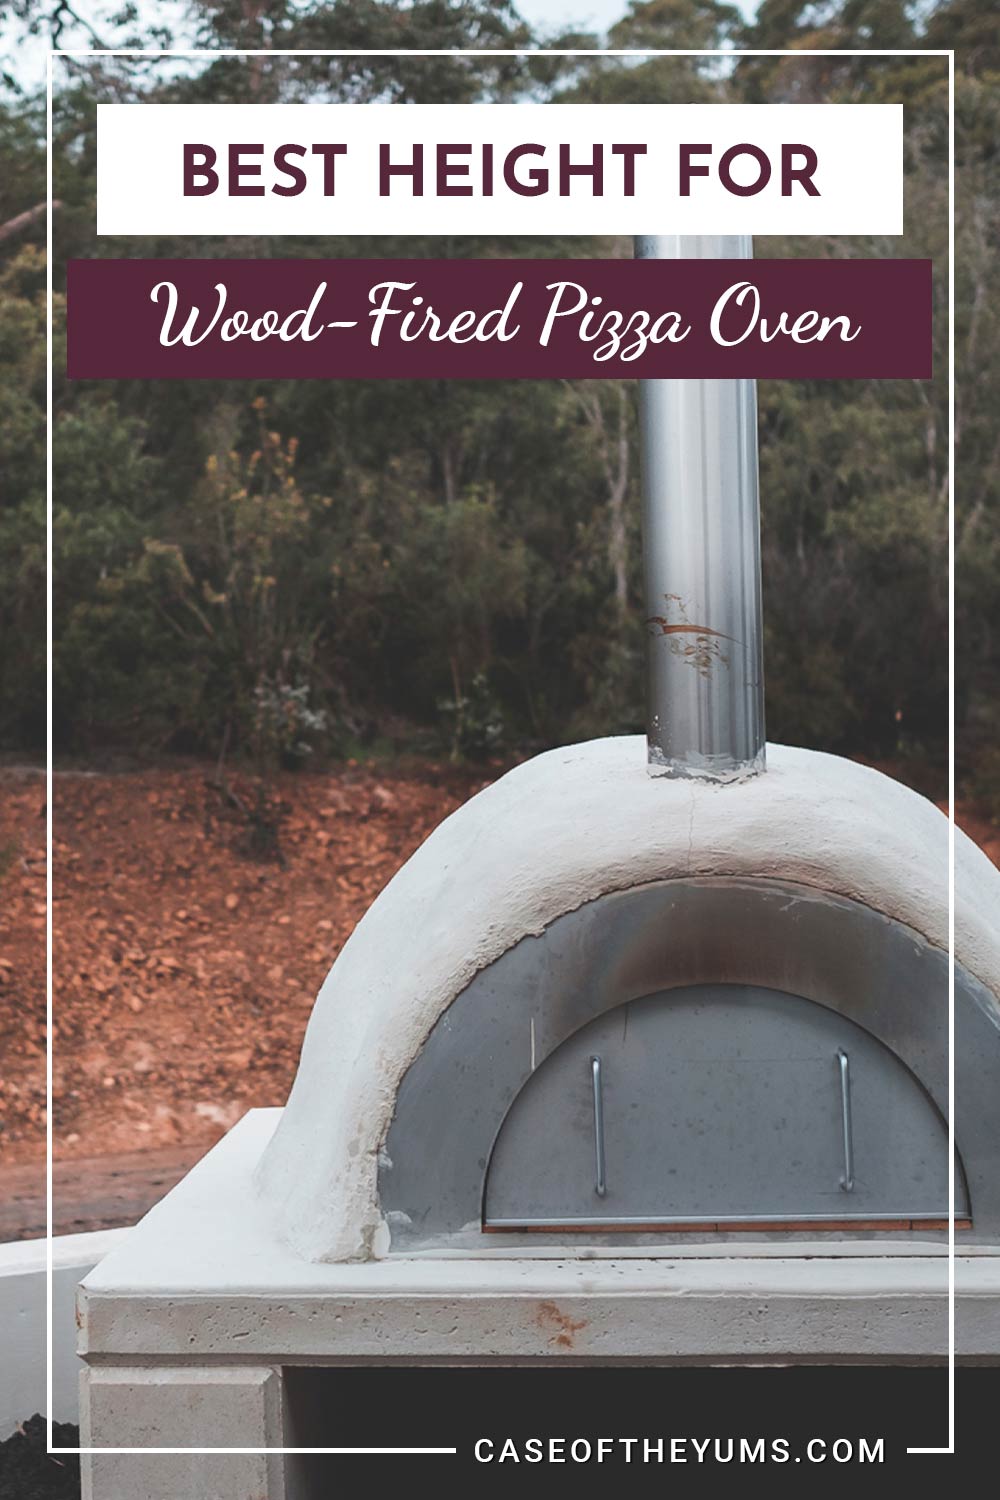 A pizza oven outdoor - Best Height for Wood-Fired Pizza Oven.